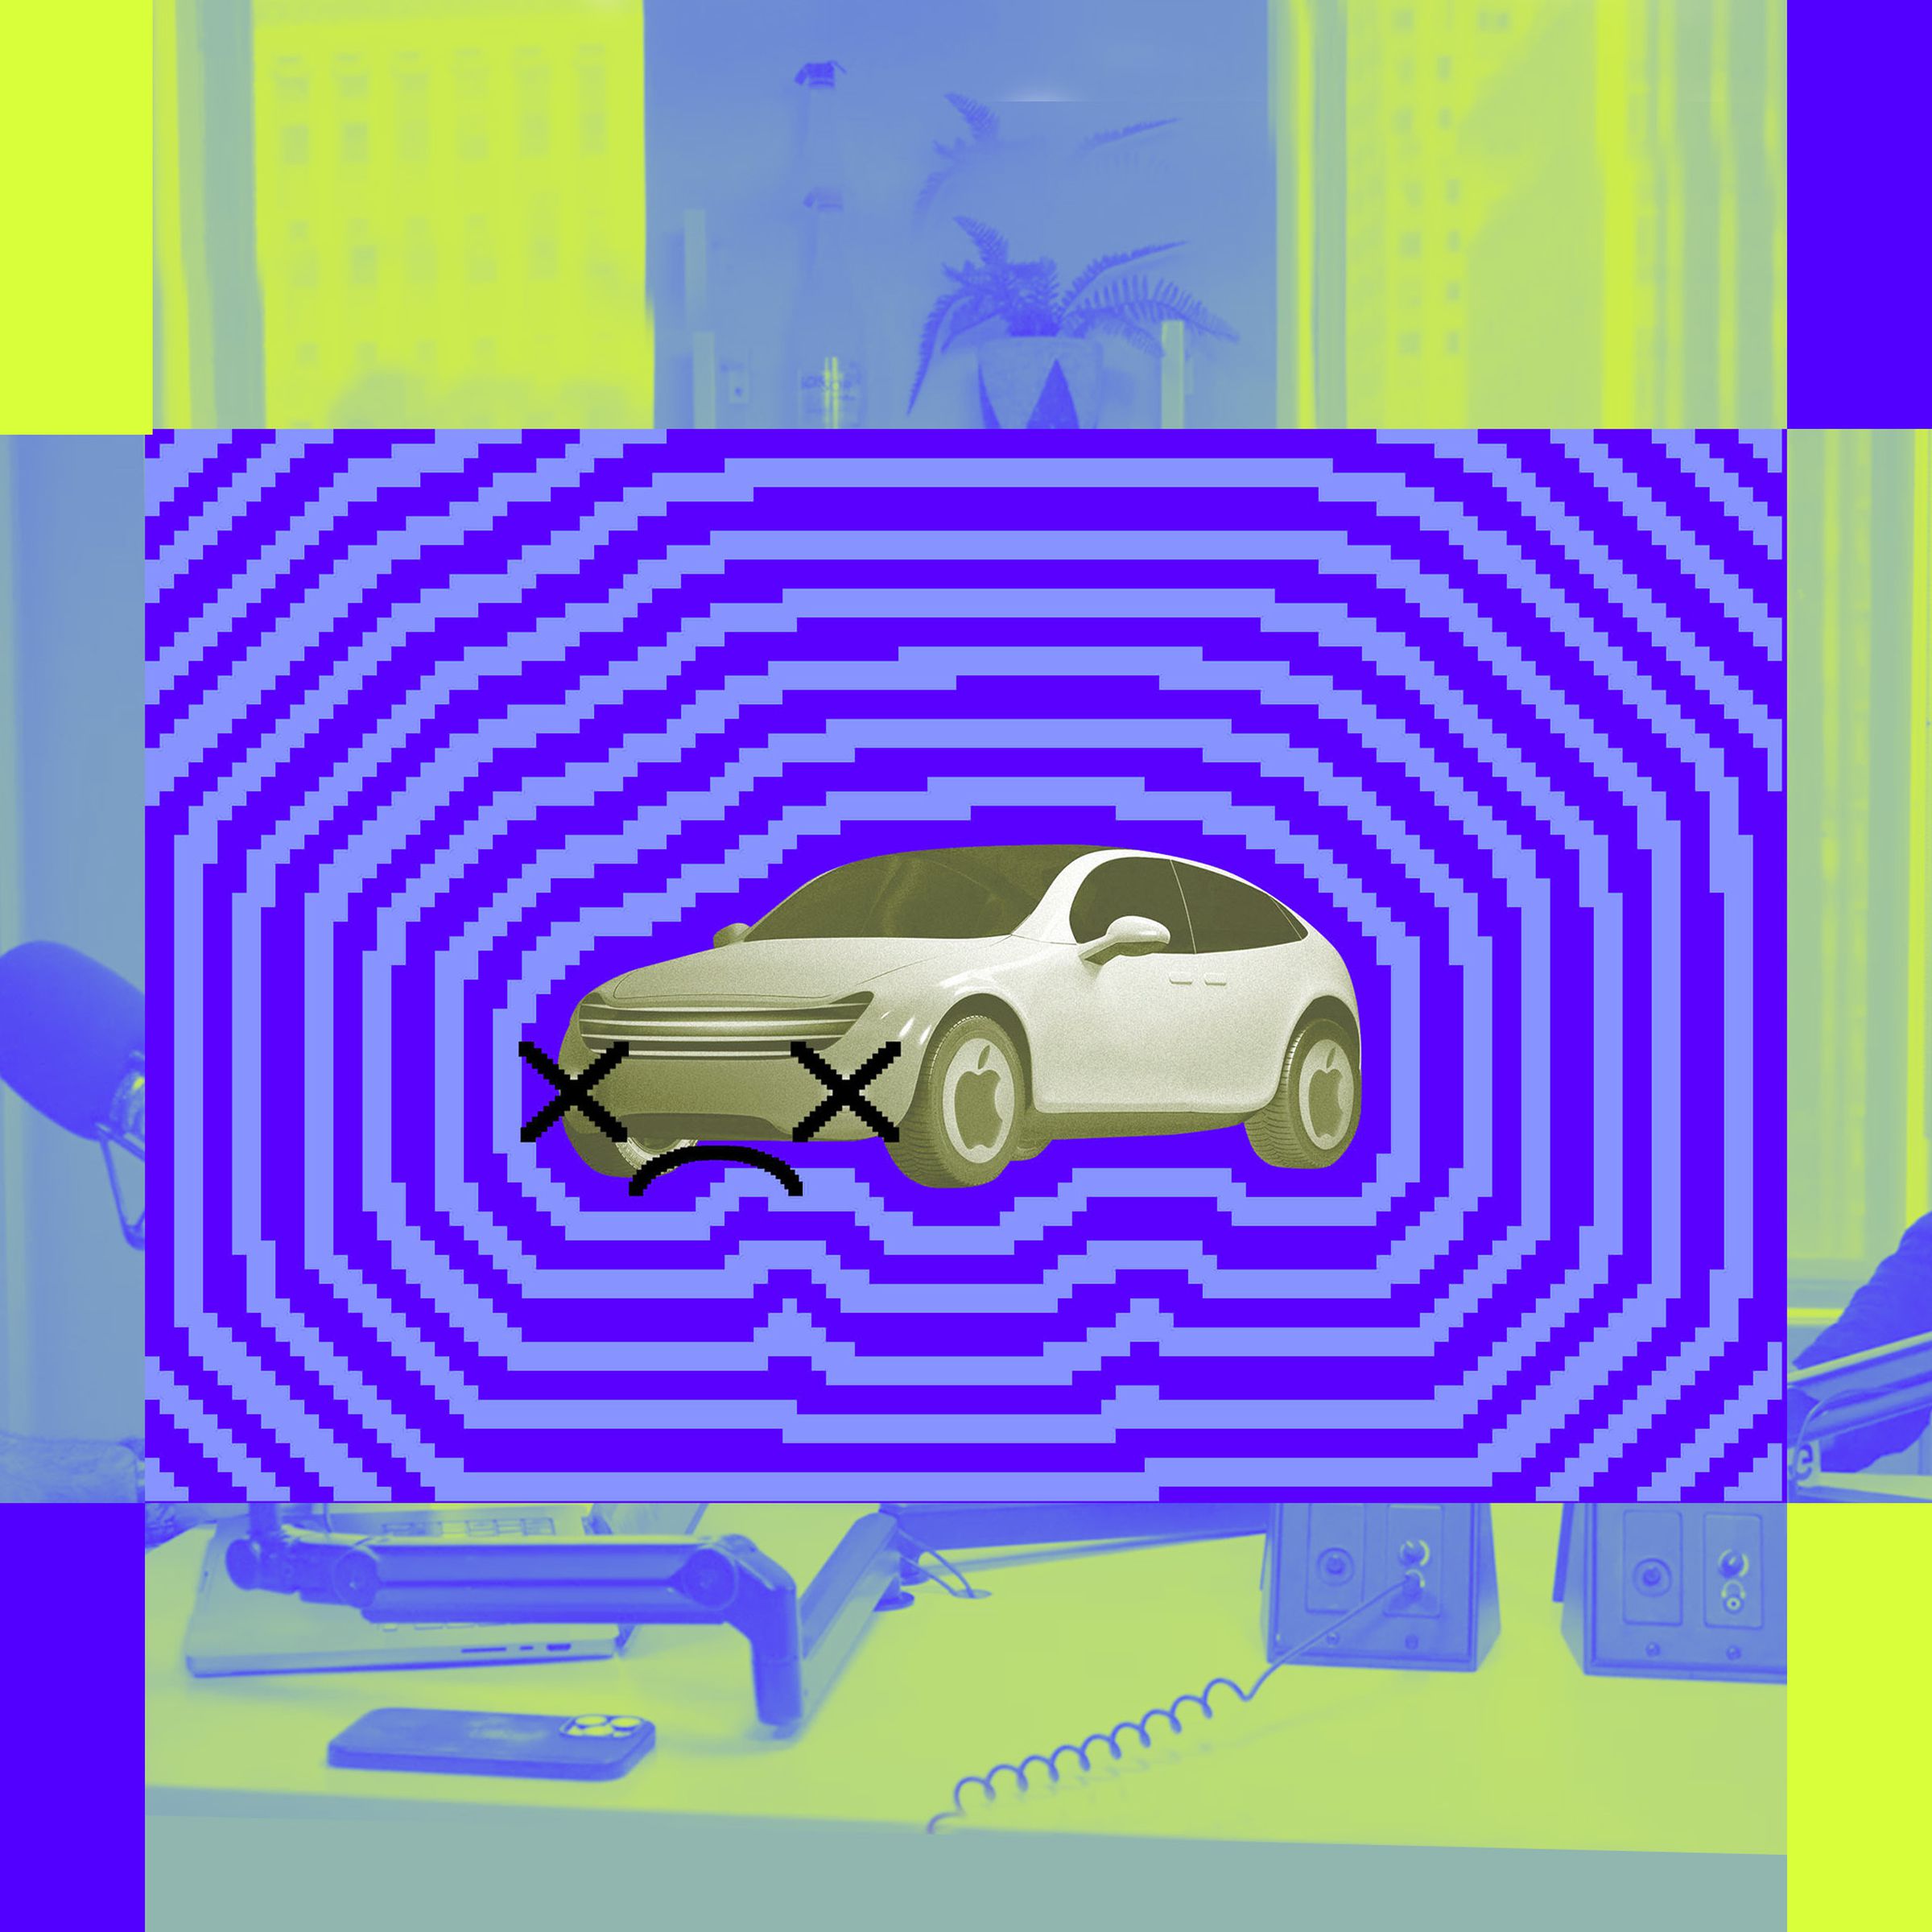 An illustration showing the Apple Car overtop of the Vergecast logo.